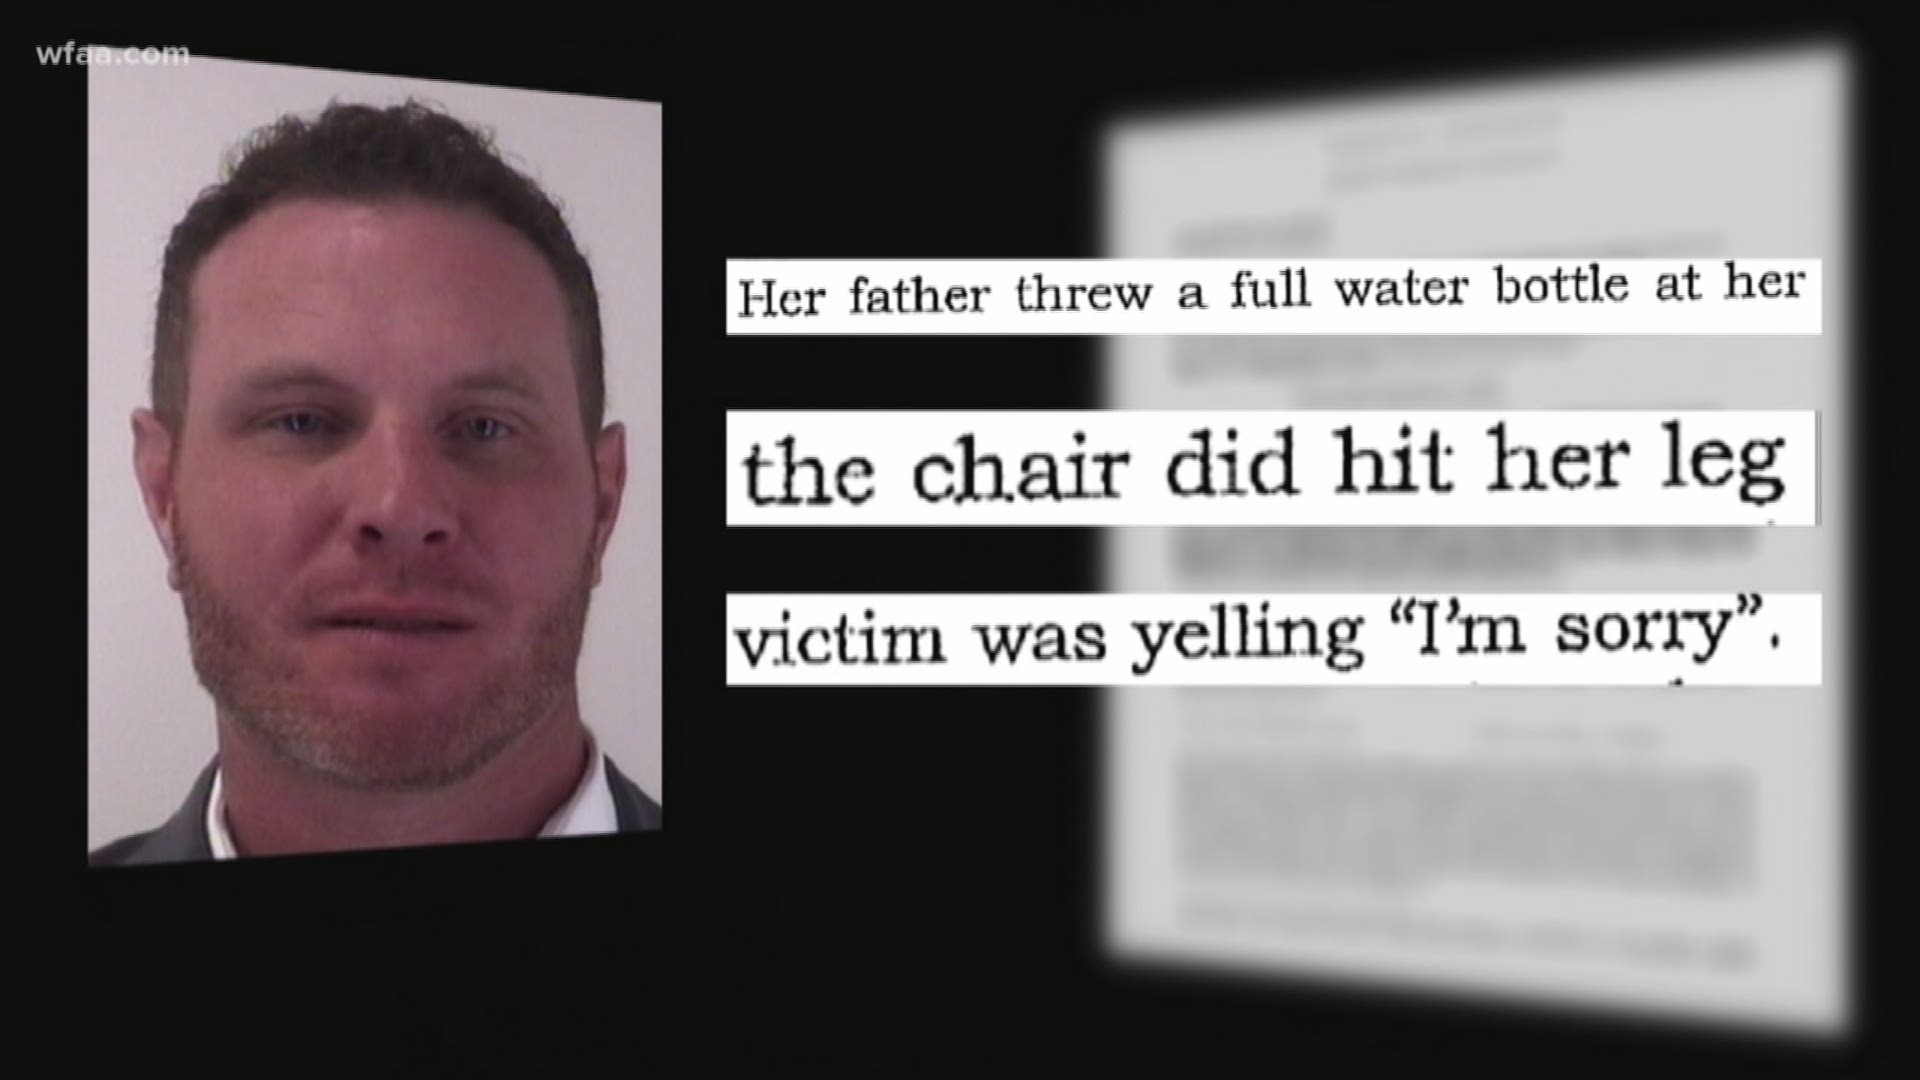 Keller police records show Hamilton is accused of repeatedly striking and slapping his daughter in September.